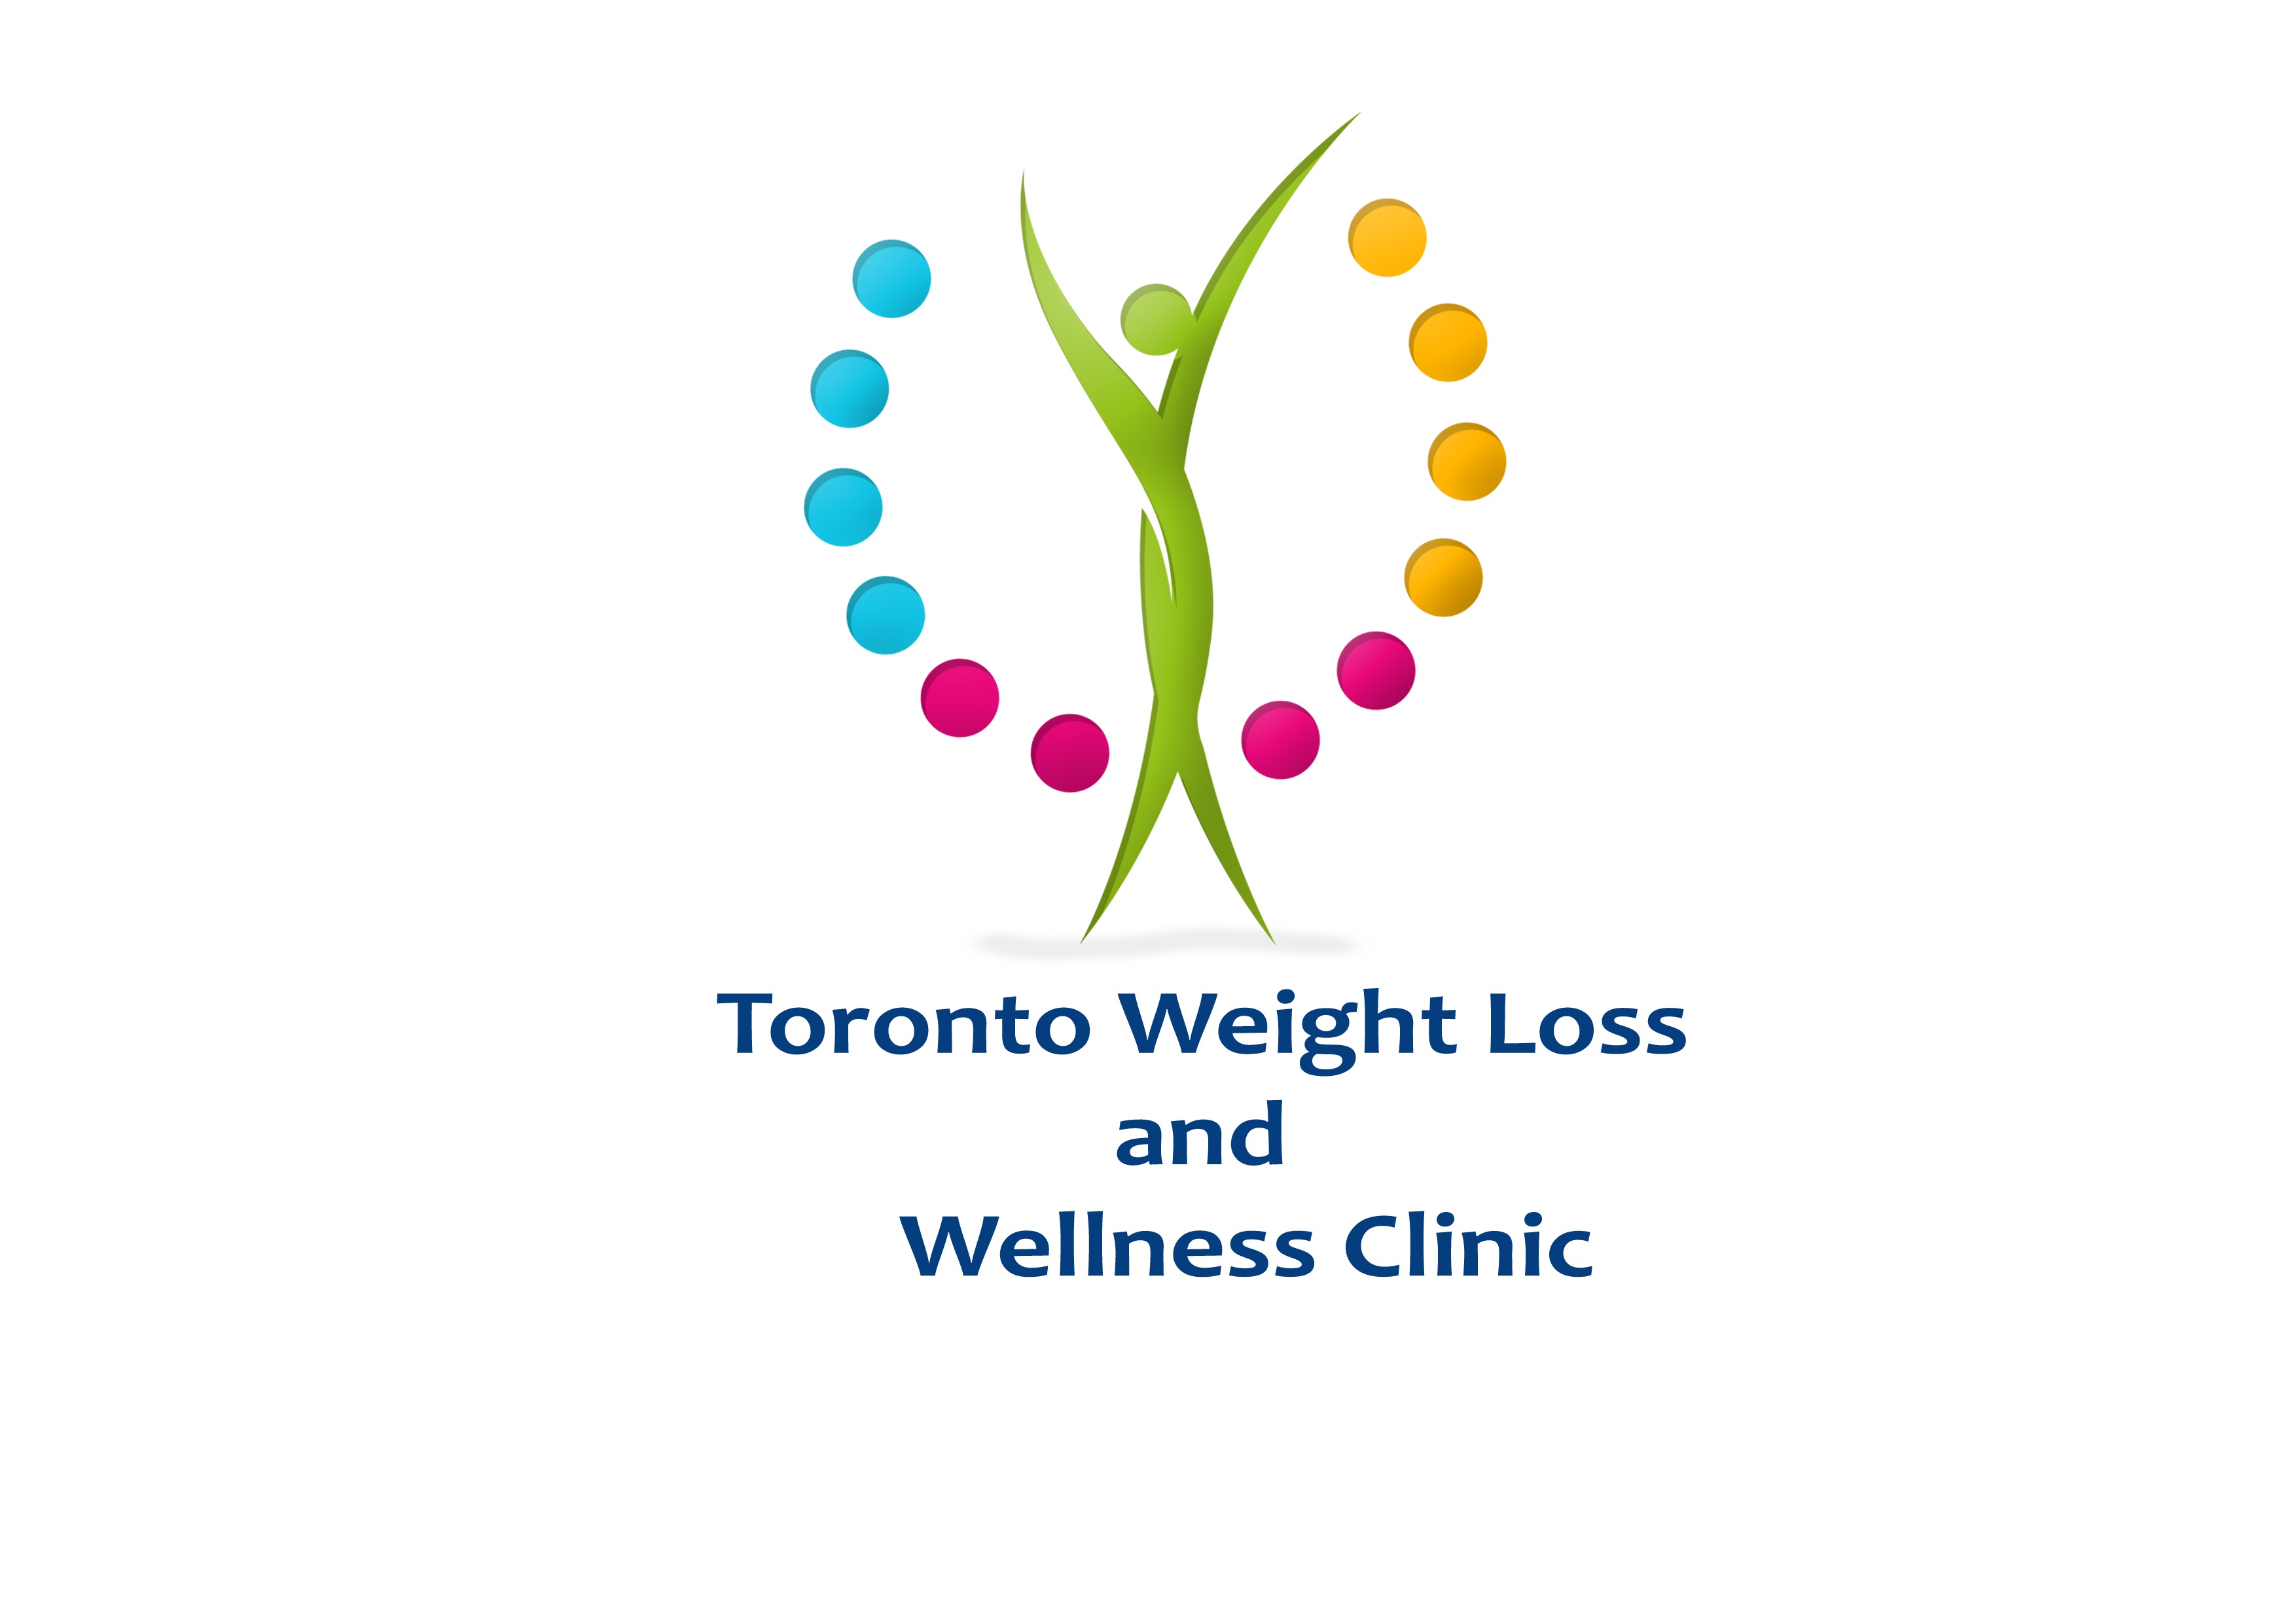 Healthy Body Weight Loss And Wellness Clinic